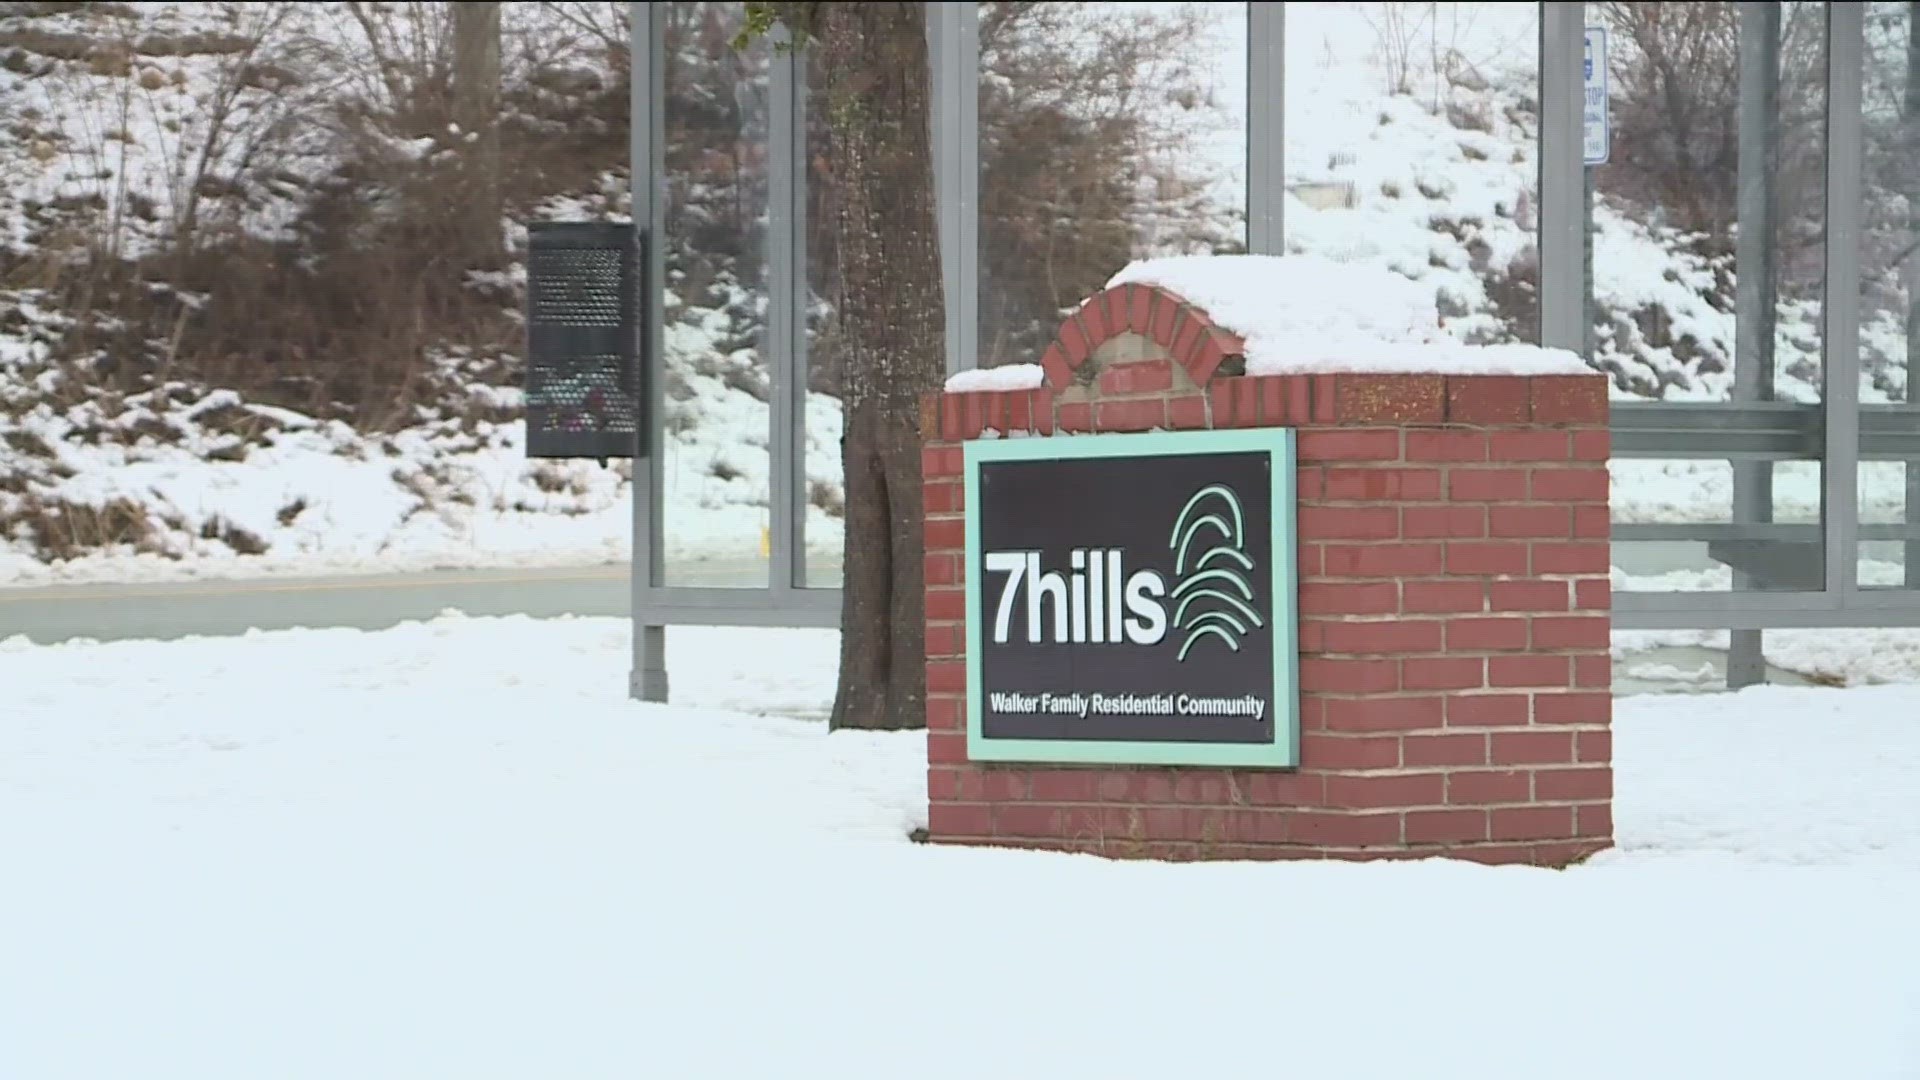 SHELTERS ACROSS NWA  ARE OPENING THEIR DOORS TO THOSE IN NEED TO PROVIDE WARMTH AND SAFETY.